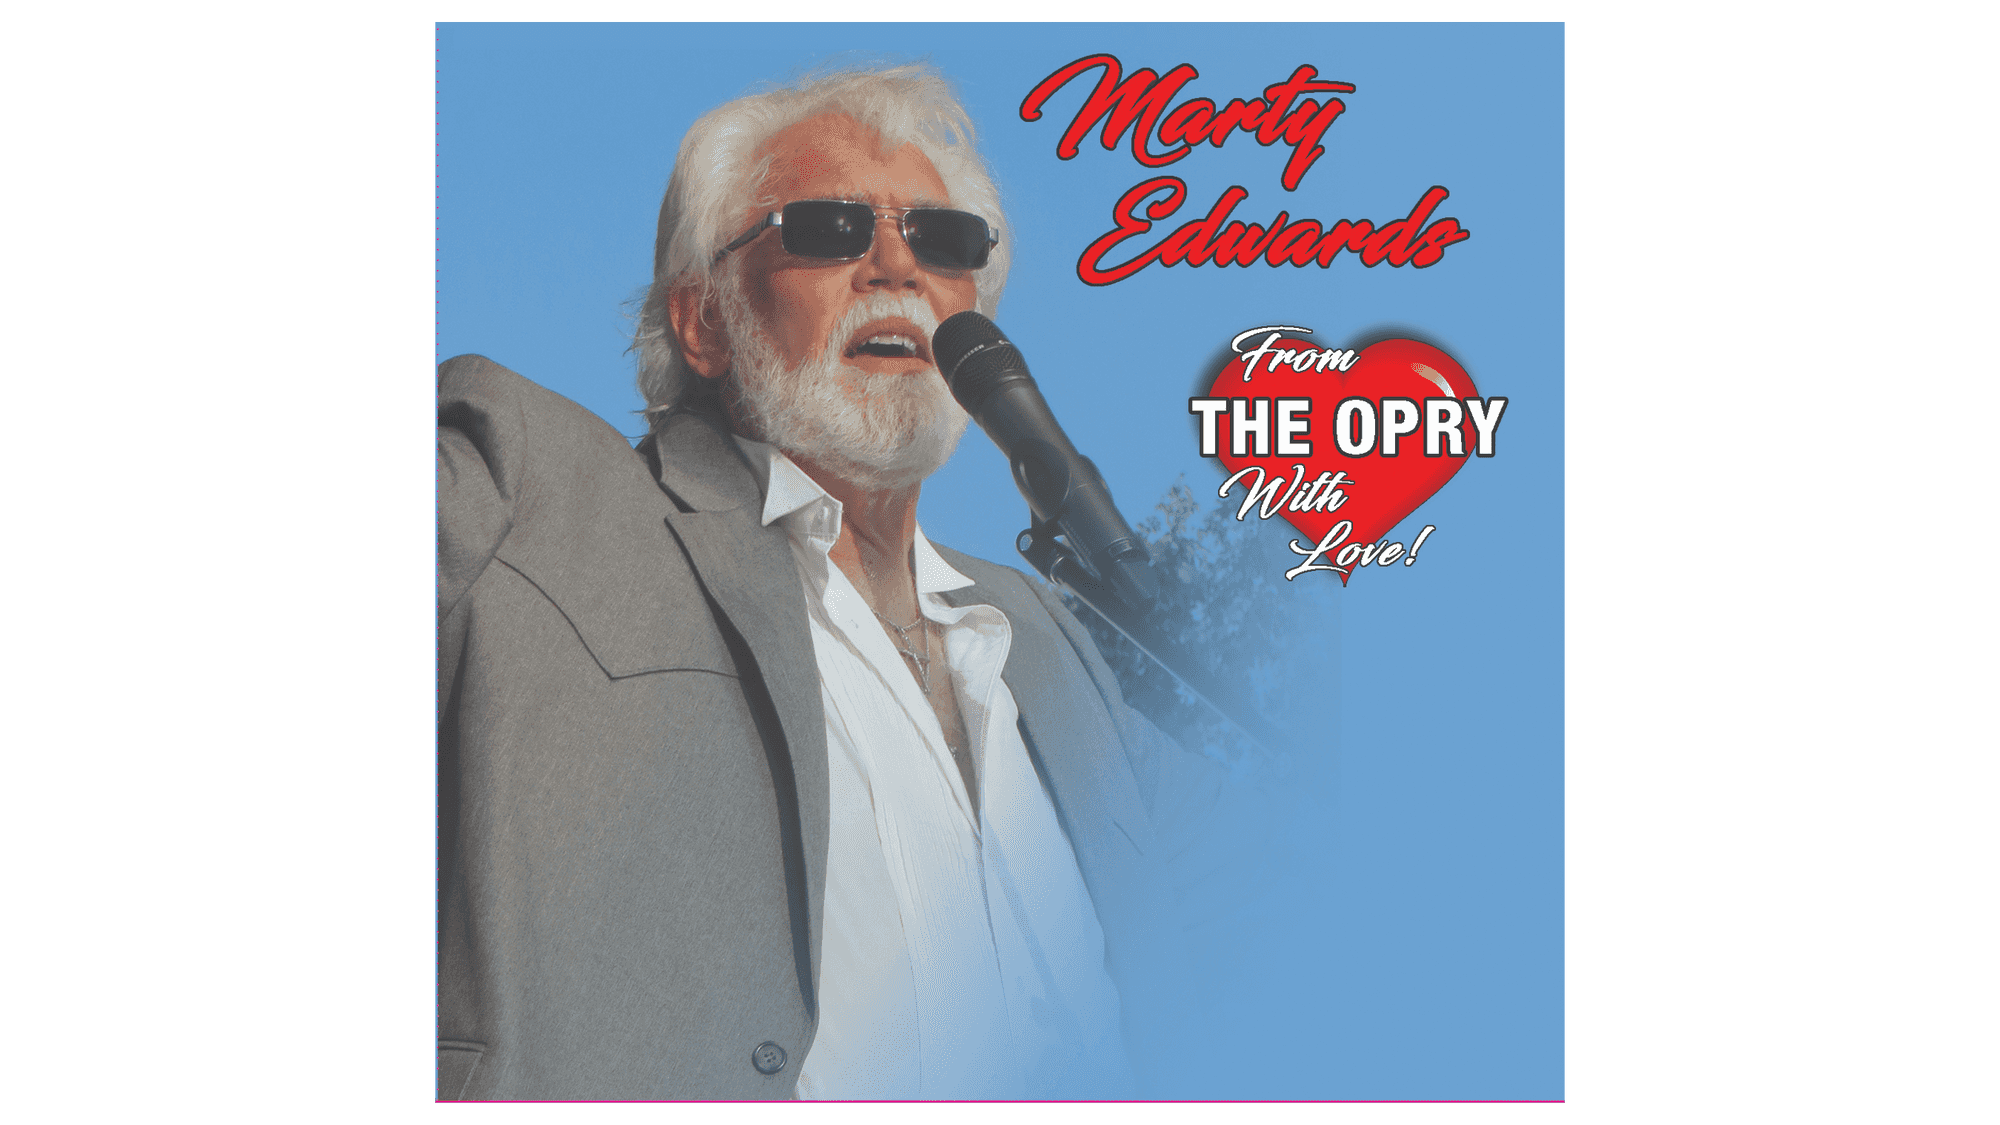 CD: Marty Edwards - From The Opry With Love!